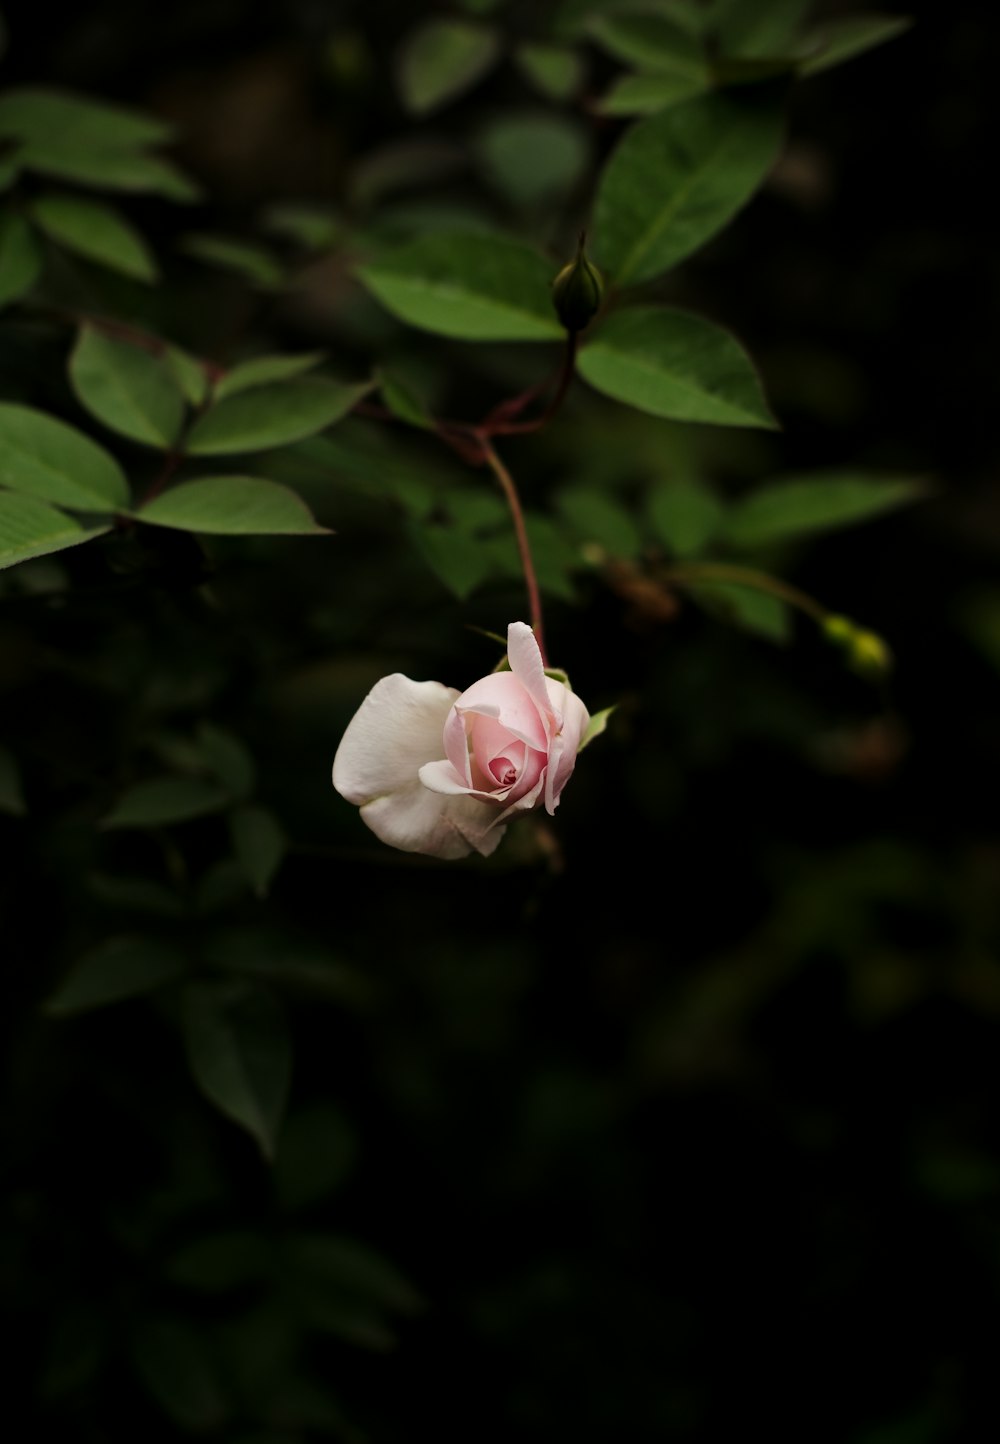 a single white rose with green leaves in the background